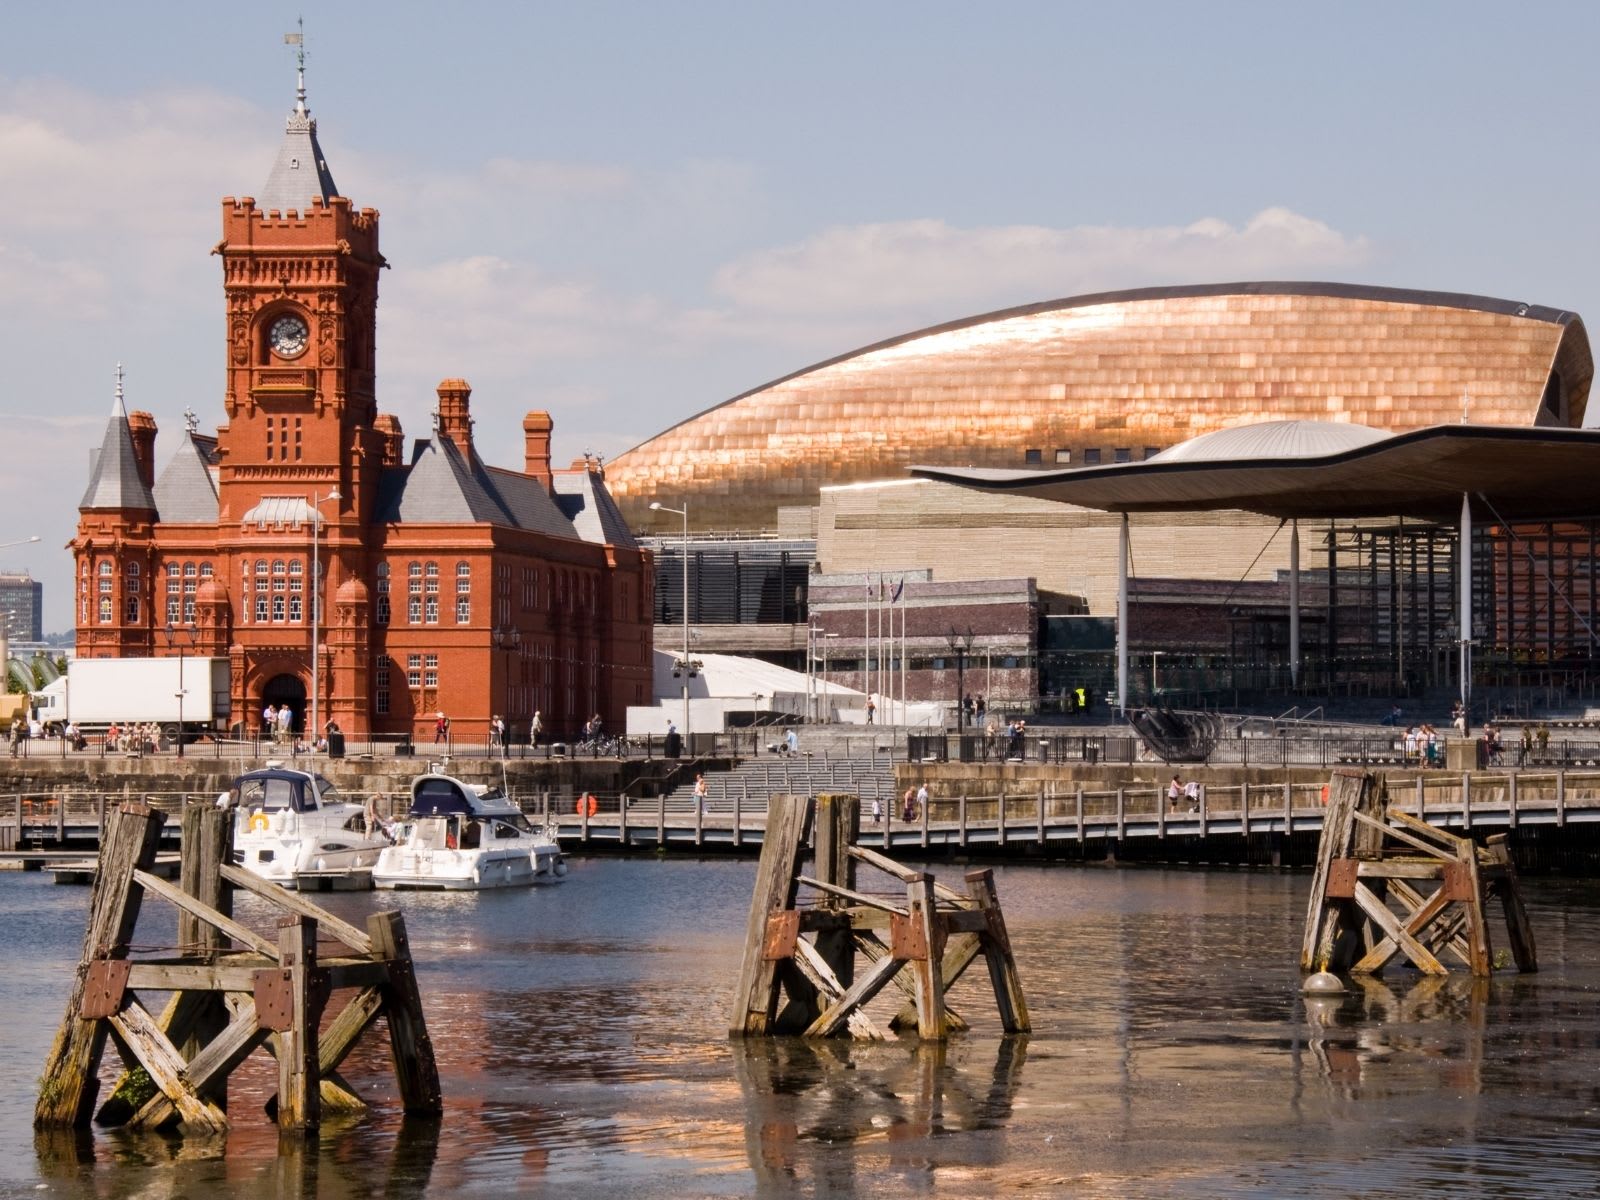 Cardiff Bay Waterfront